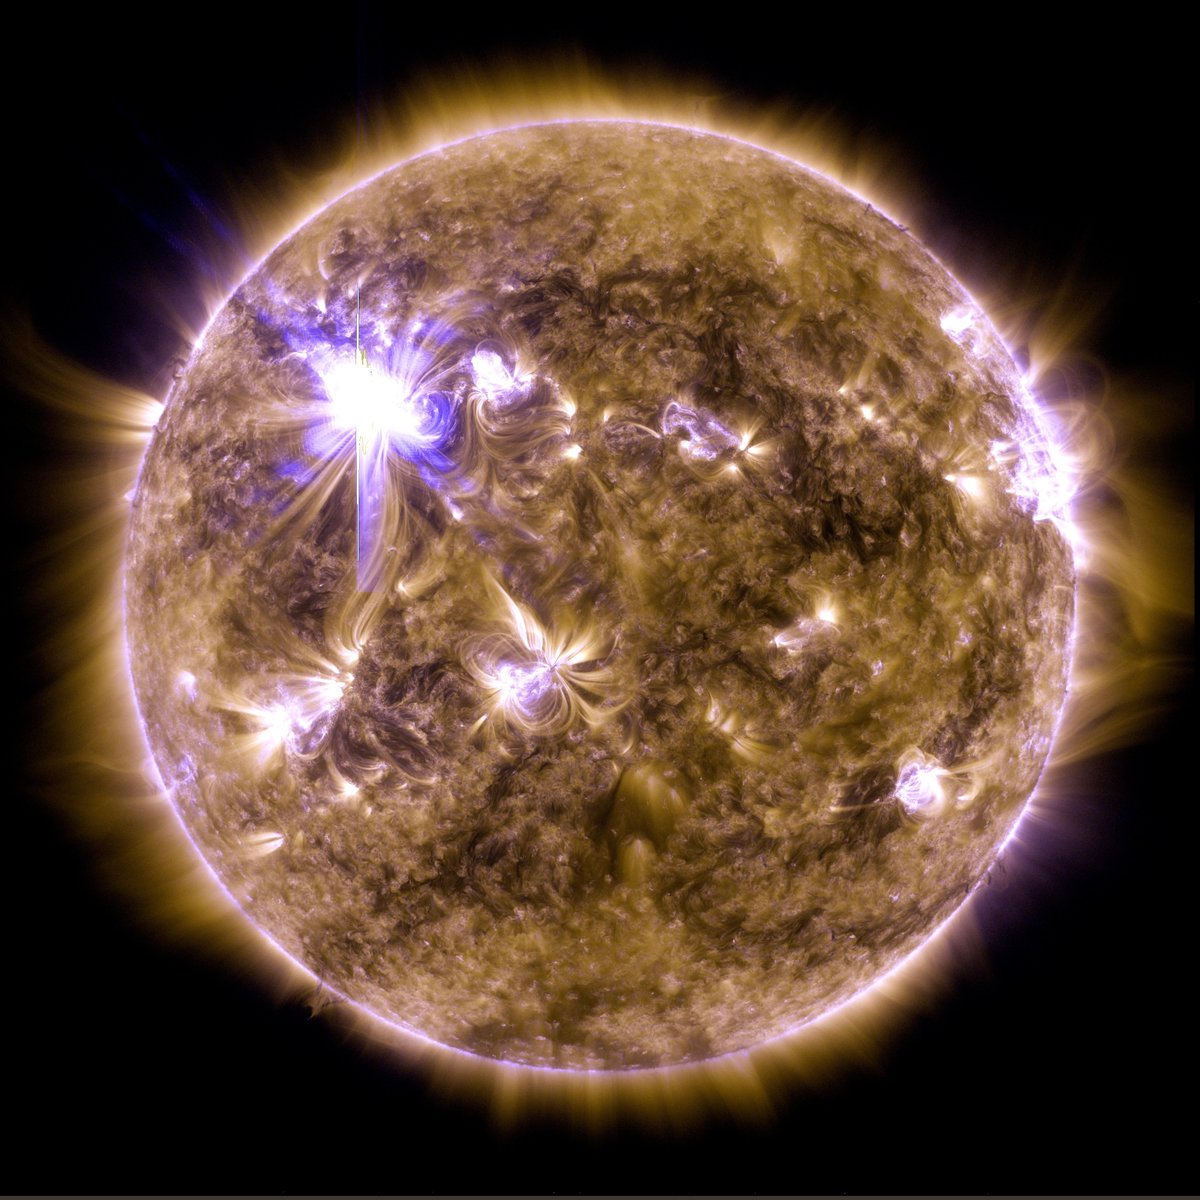 The core temperature of the sun is approx. 15,000,000 °C. Highest temperature ever achieved on Earth is 5,500,000,000,000 °C.